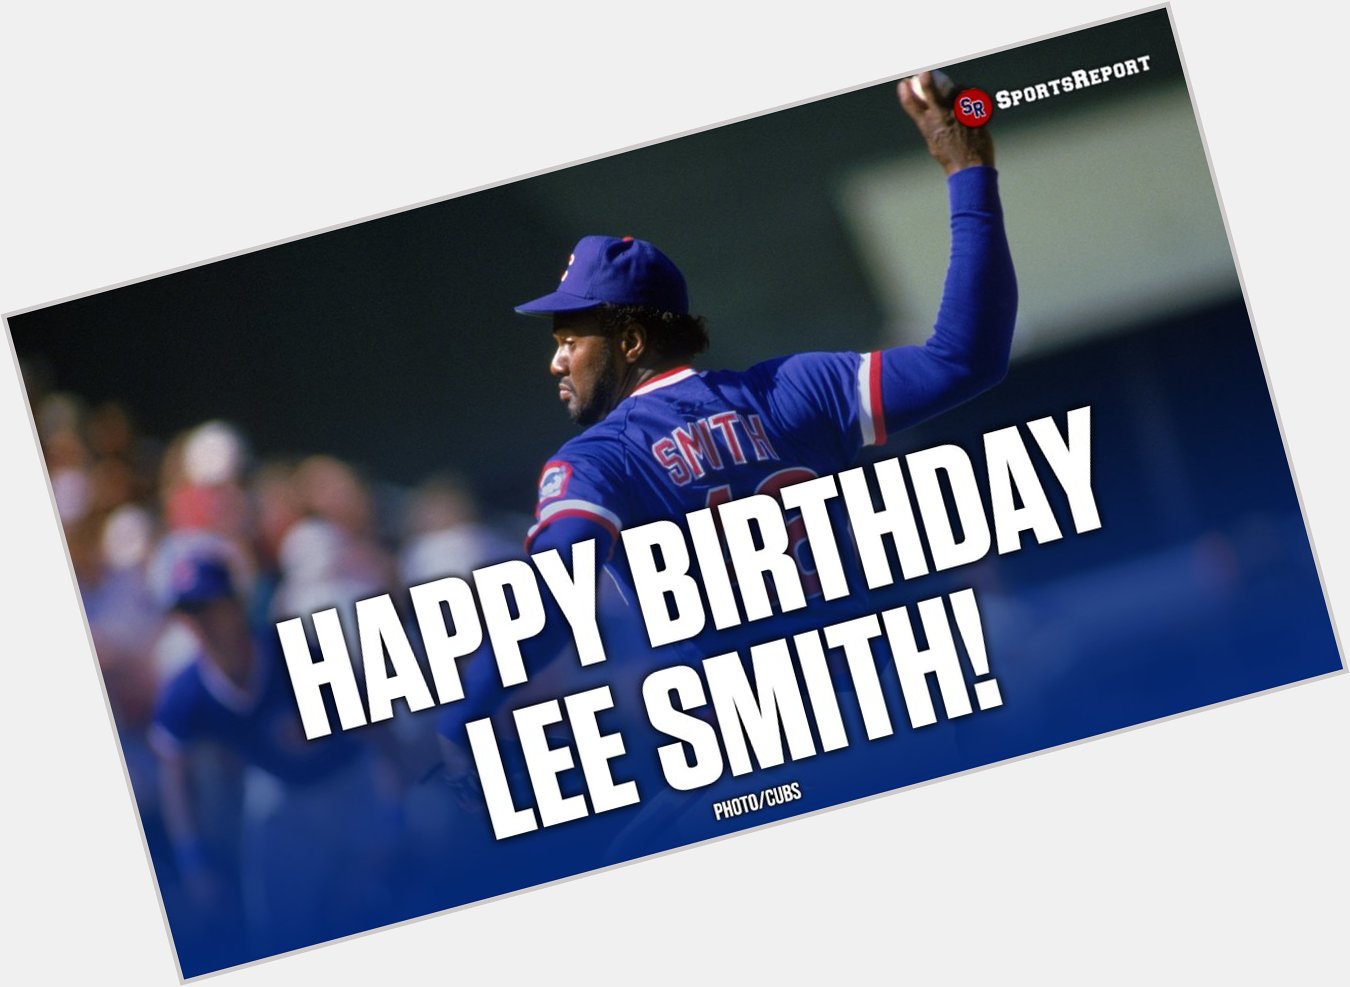  Fans, let\s wish legend Lee Smith a Happy Birthday! GO CUBS!! 